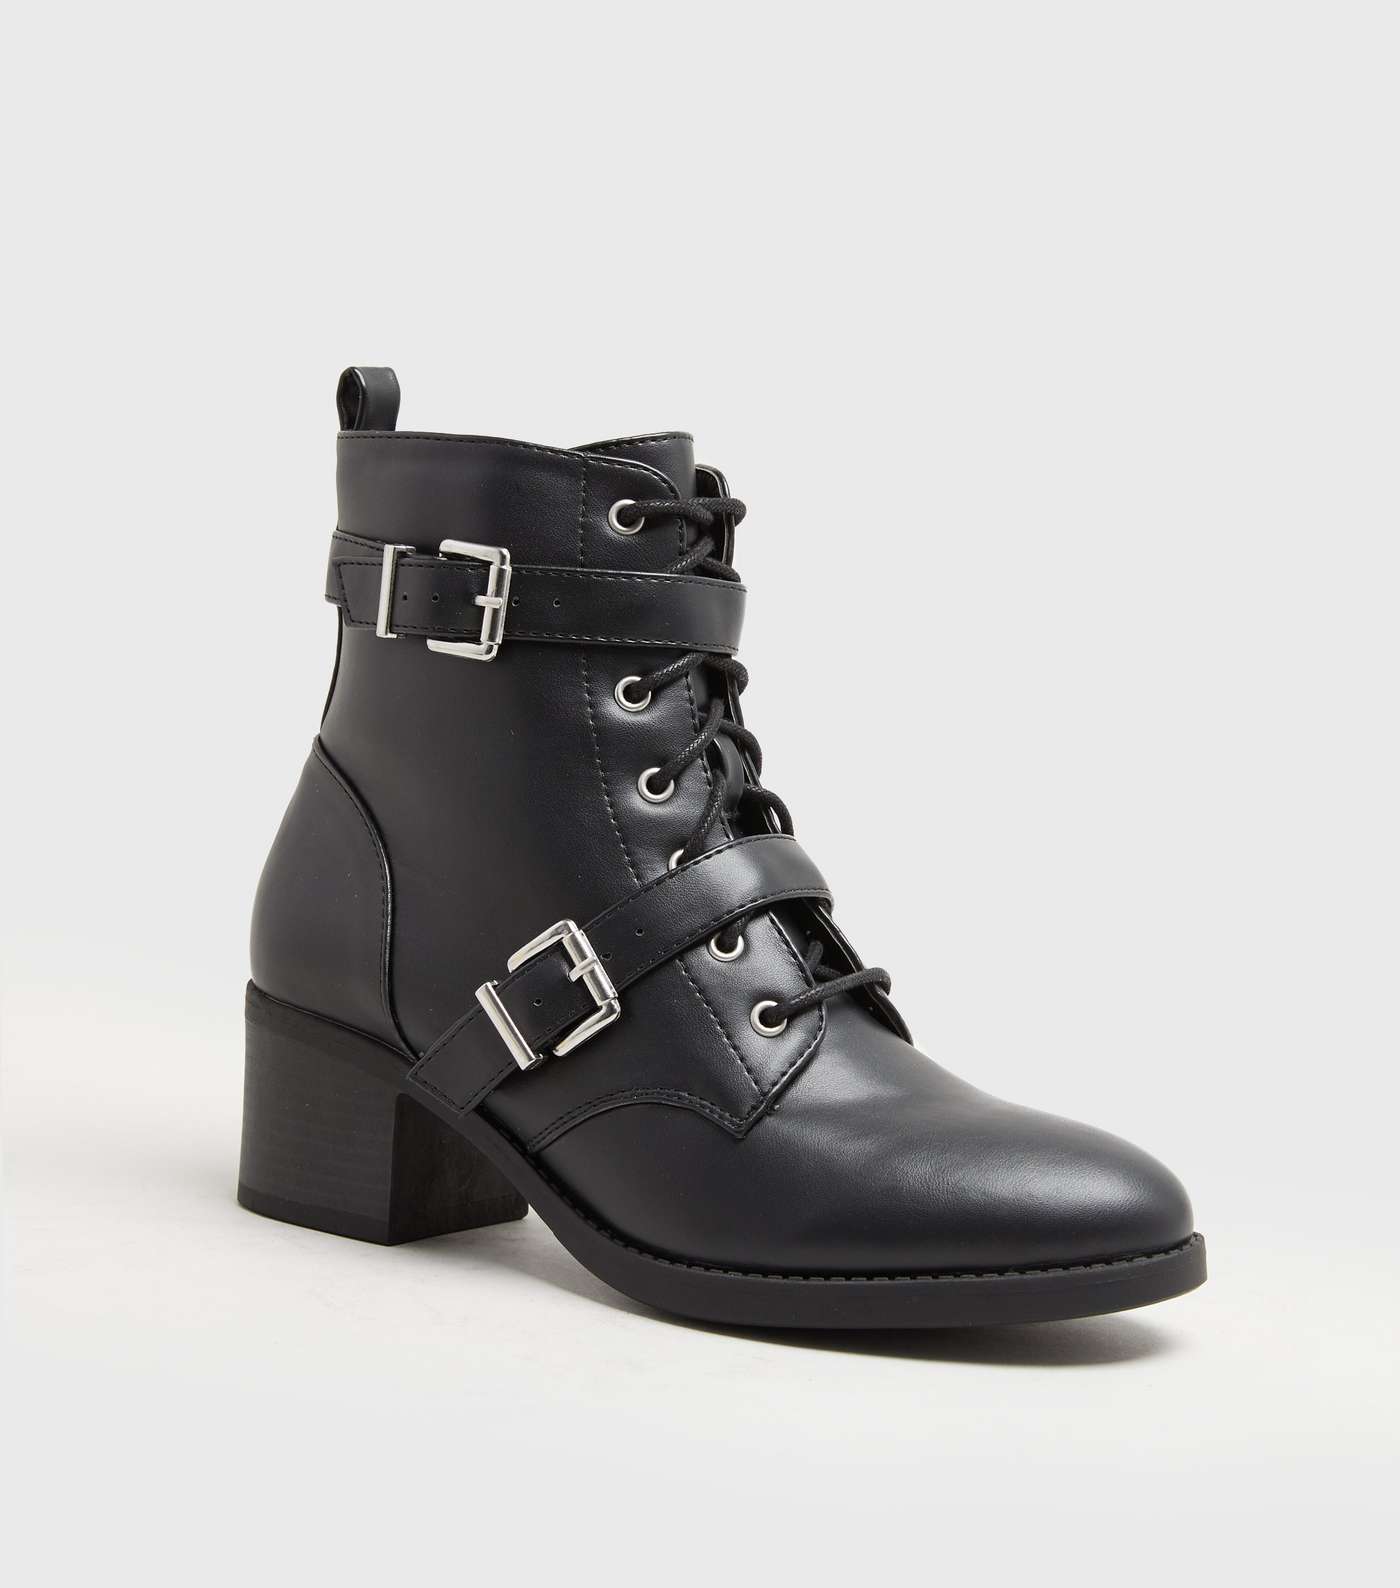 Black Buckle Lace Up Mid Heel Ankle Boots Image 2